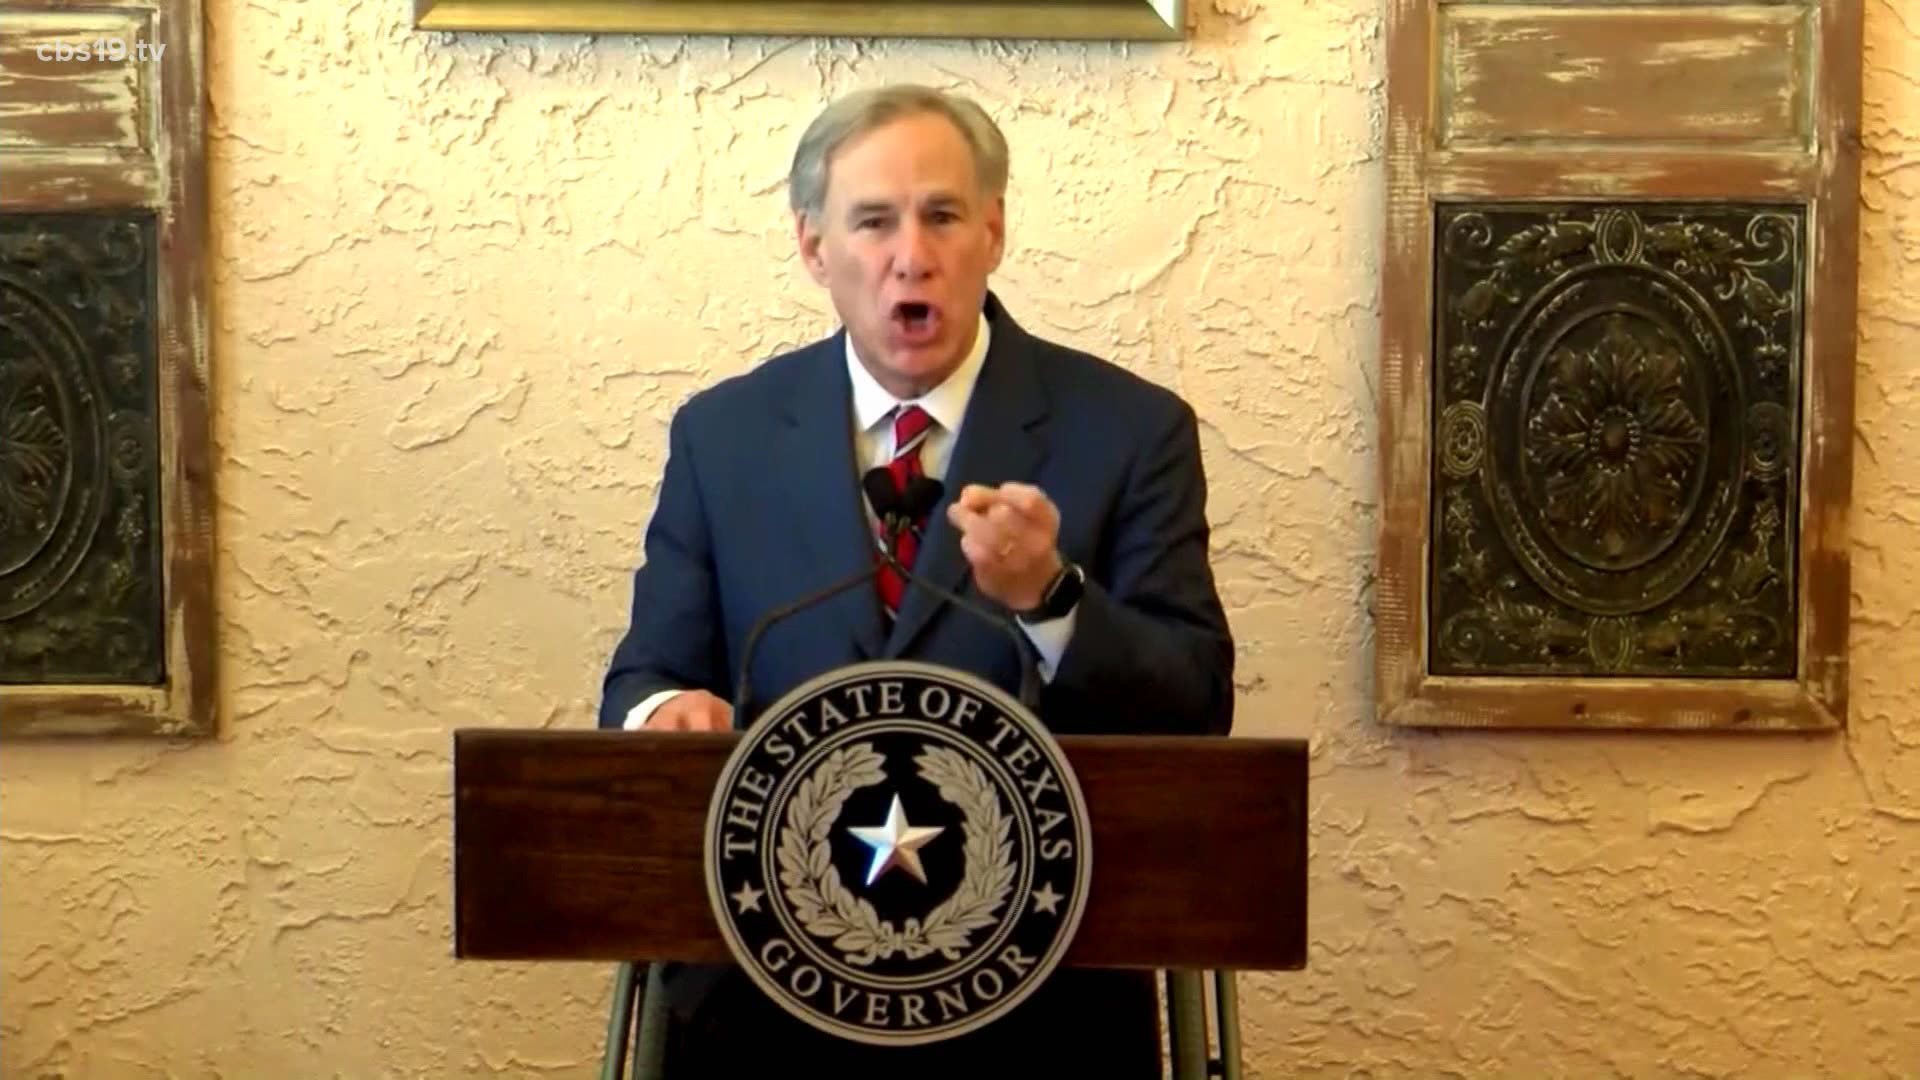 Gov. Greg Abbott announced effective March 10 at midnight, the state of Texas will open businesses 100% and the mask mandate will be lifted.